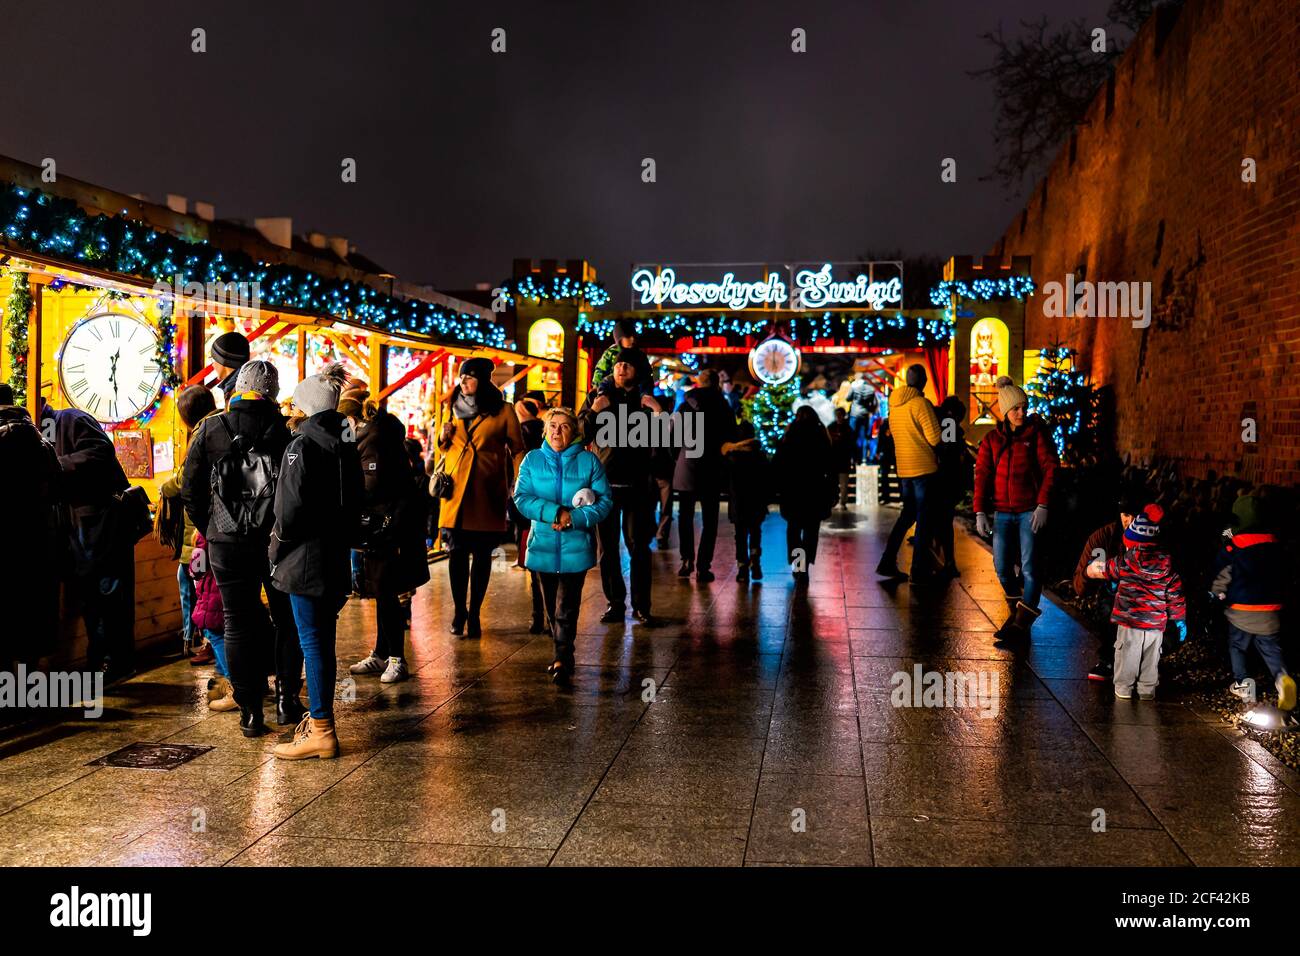 Warsaw, Poland - December 22, 2019: Old town Warszawa Christmas market near royal castle square people walking by entrance with illumination lights at Stock Photo